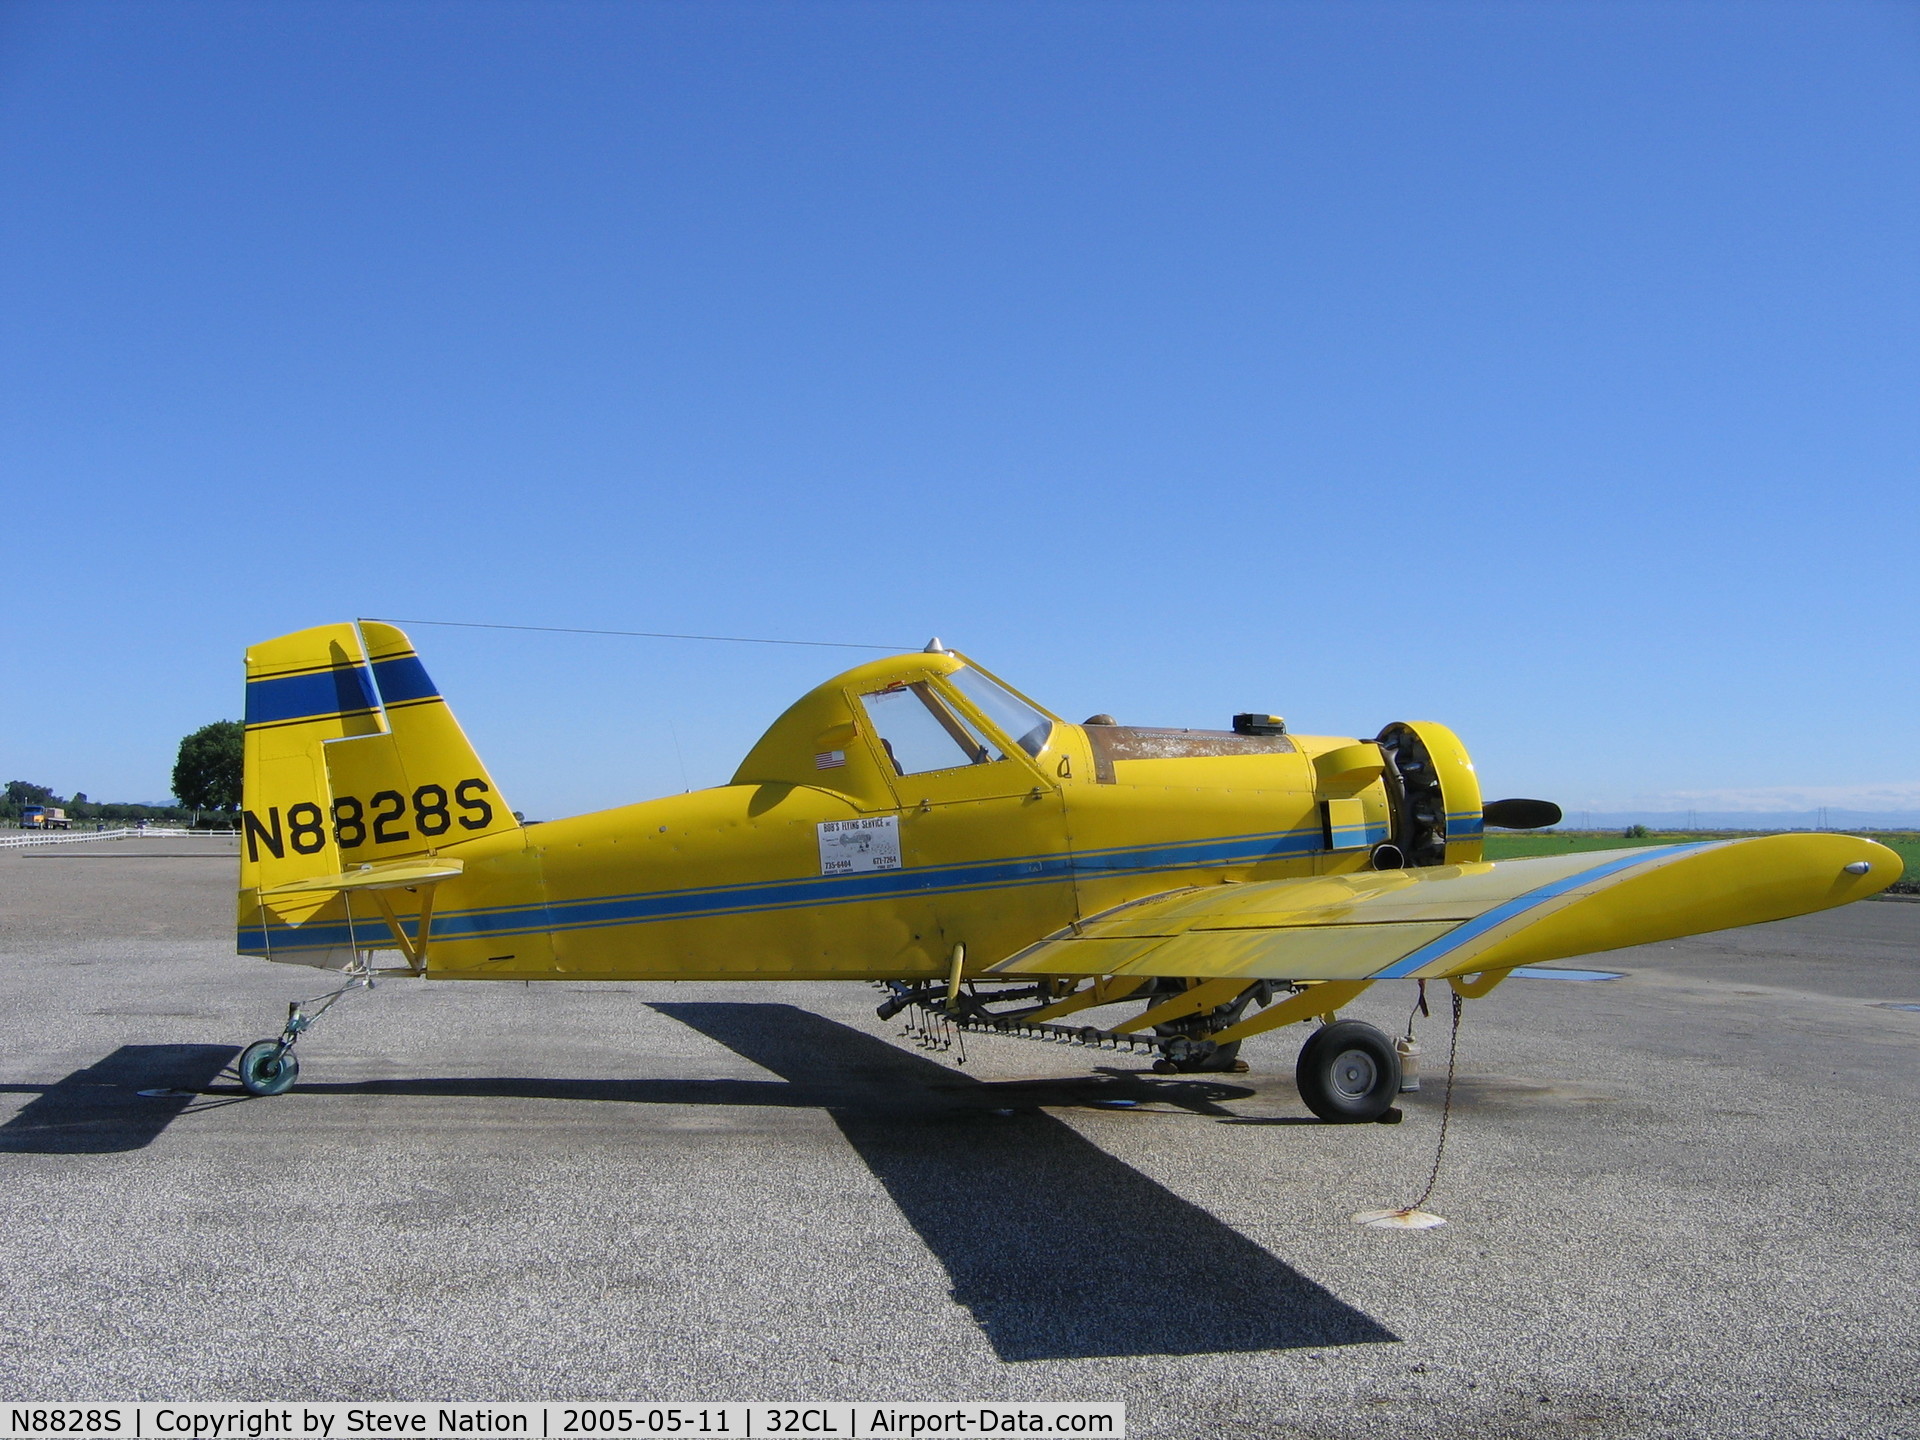 N8828S, 1979 Air Tractor Inc AT-301 C/N 301-0204, AT-301 N8828S of Bob's Flying Service near Knights Landing, CA (rigged for spraying)